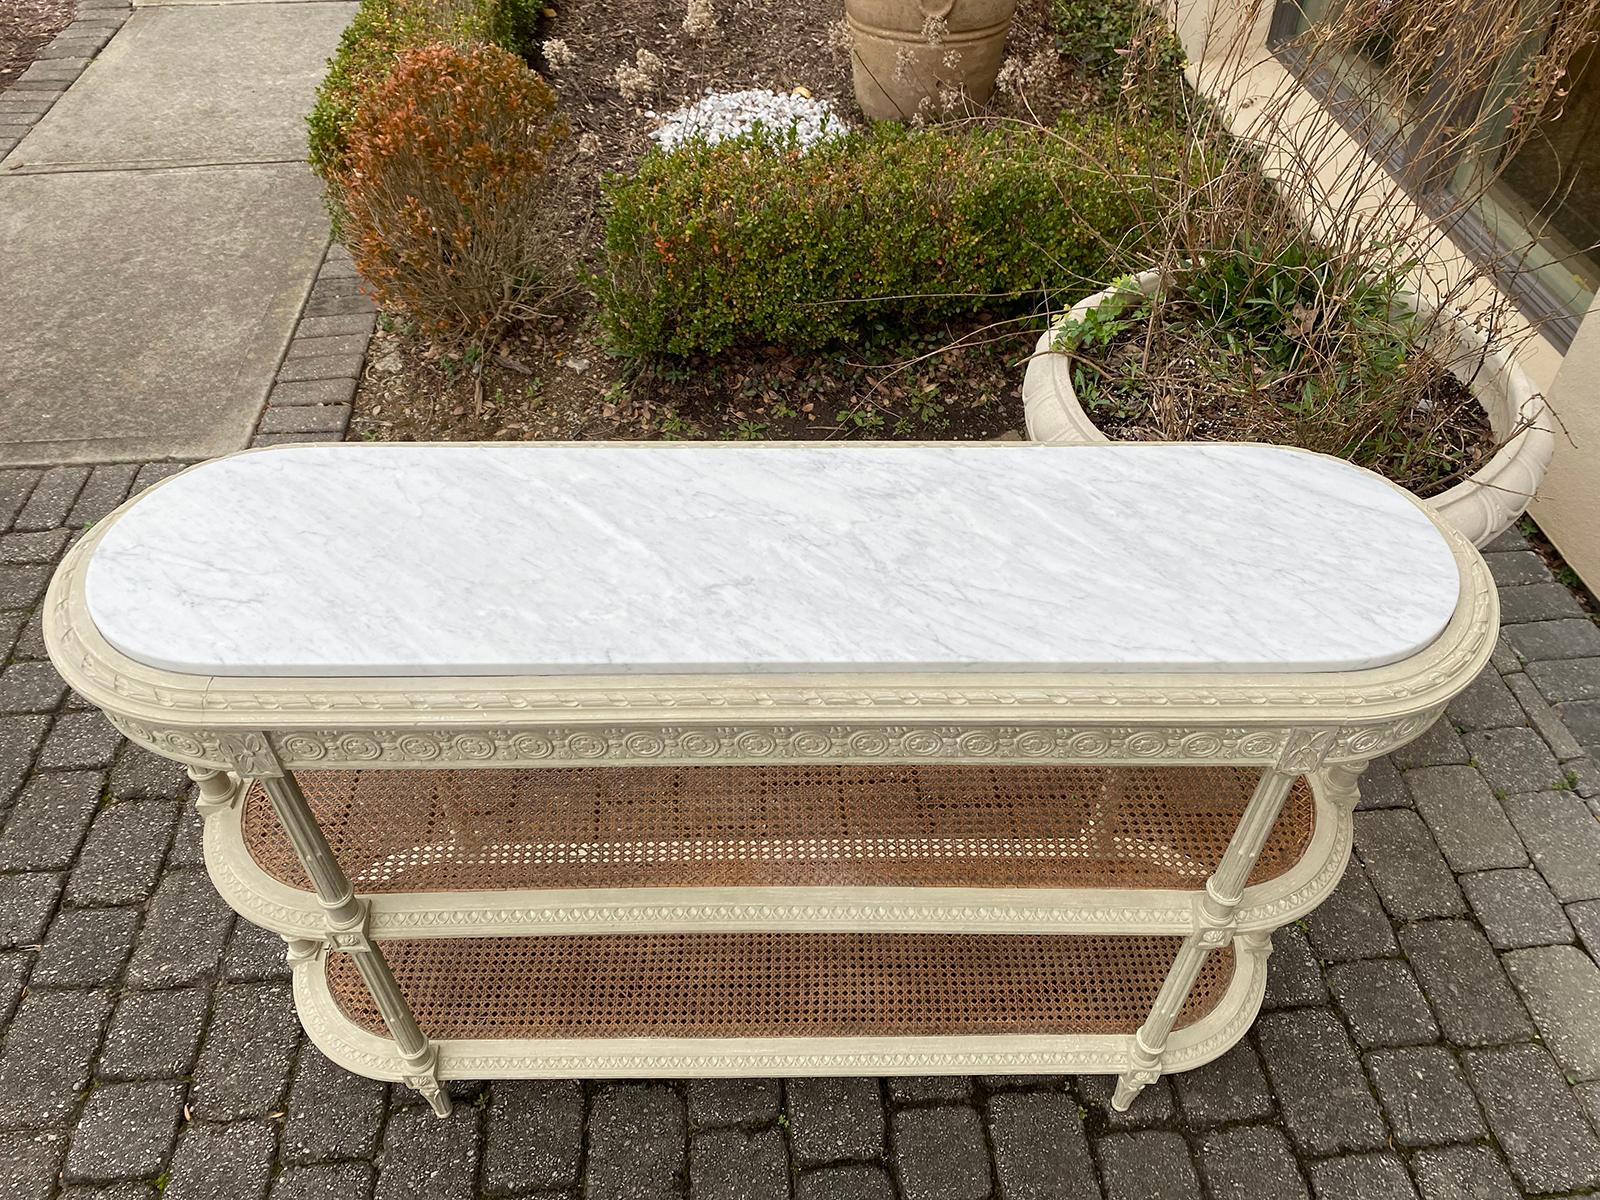 Early 20th Century Circa 1900 Louis XVI Style Marble Top 3 Tiered Console, White Carrara Marble Top